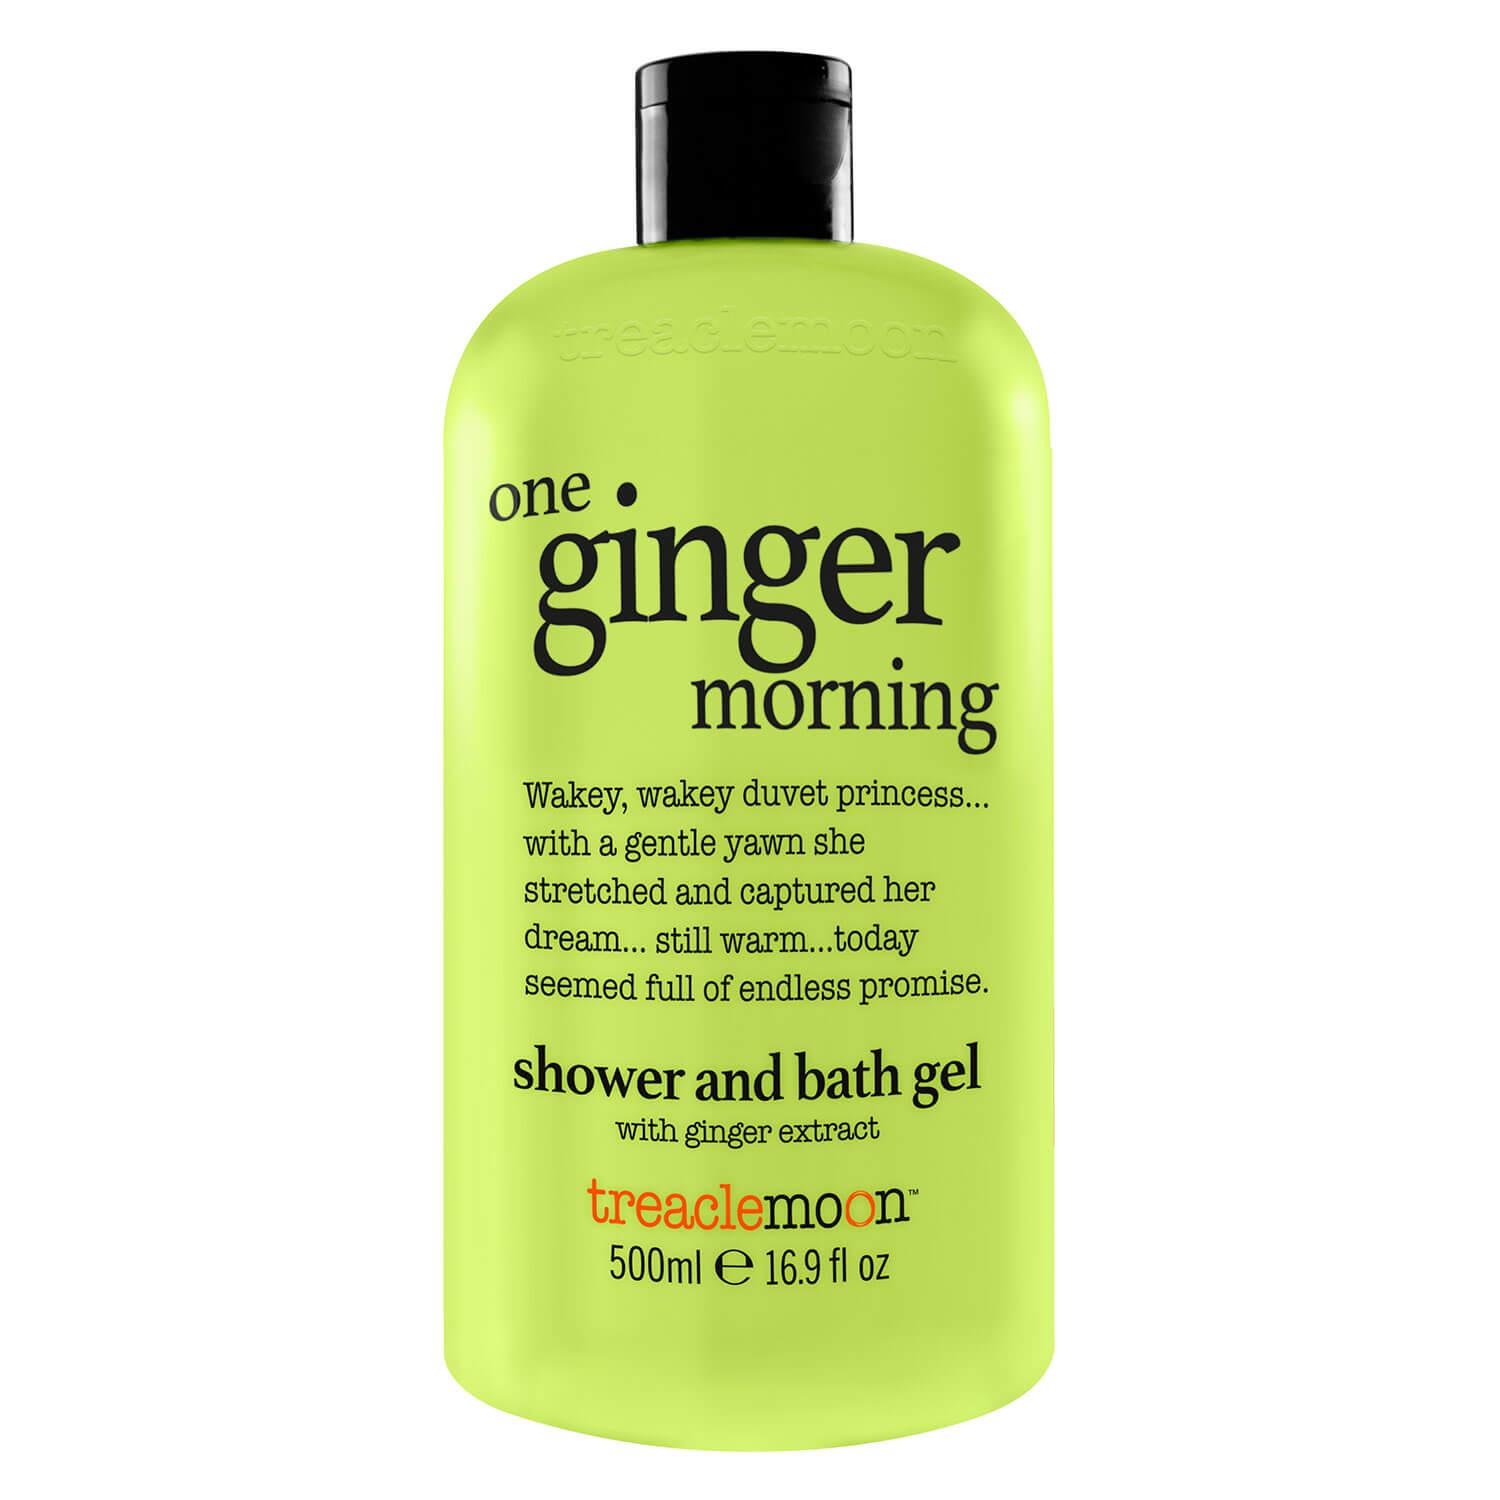 treaclemoon - one ginger morning shower and bath gel